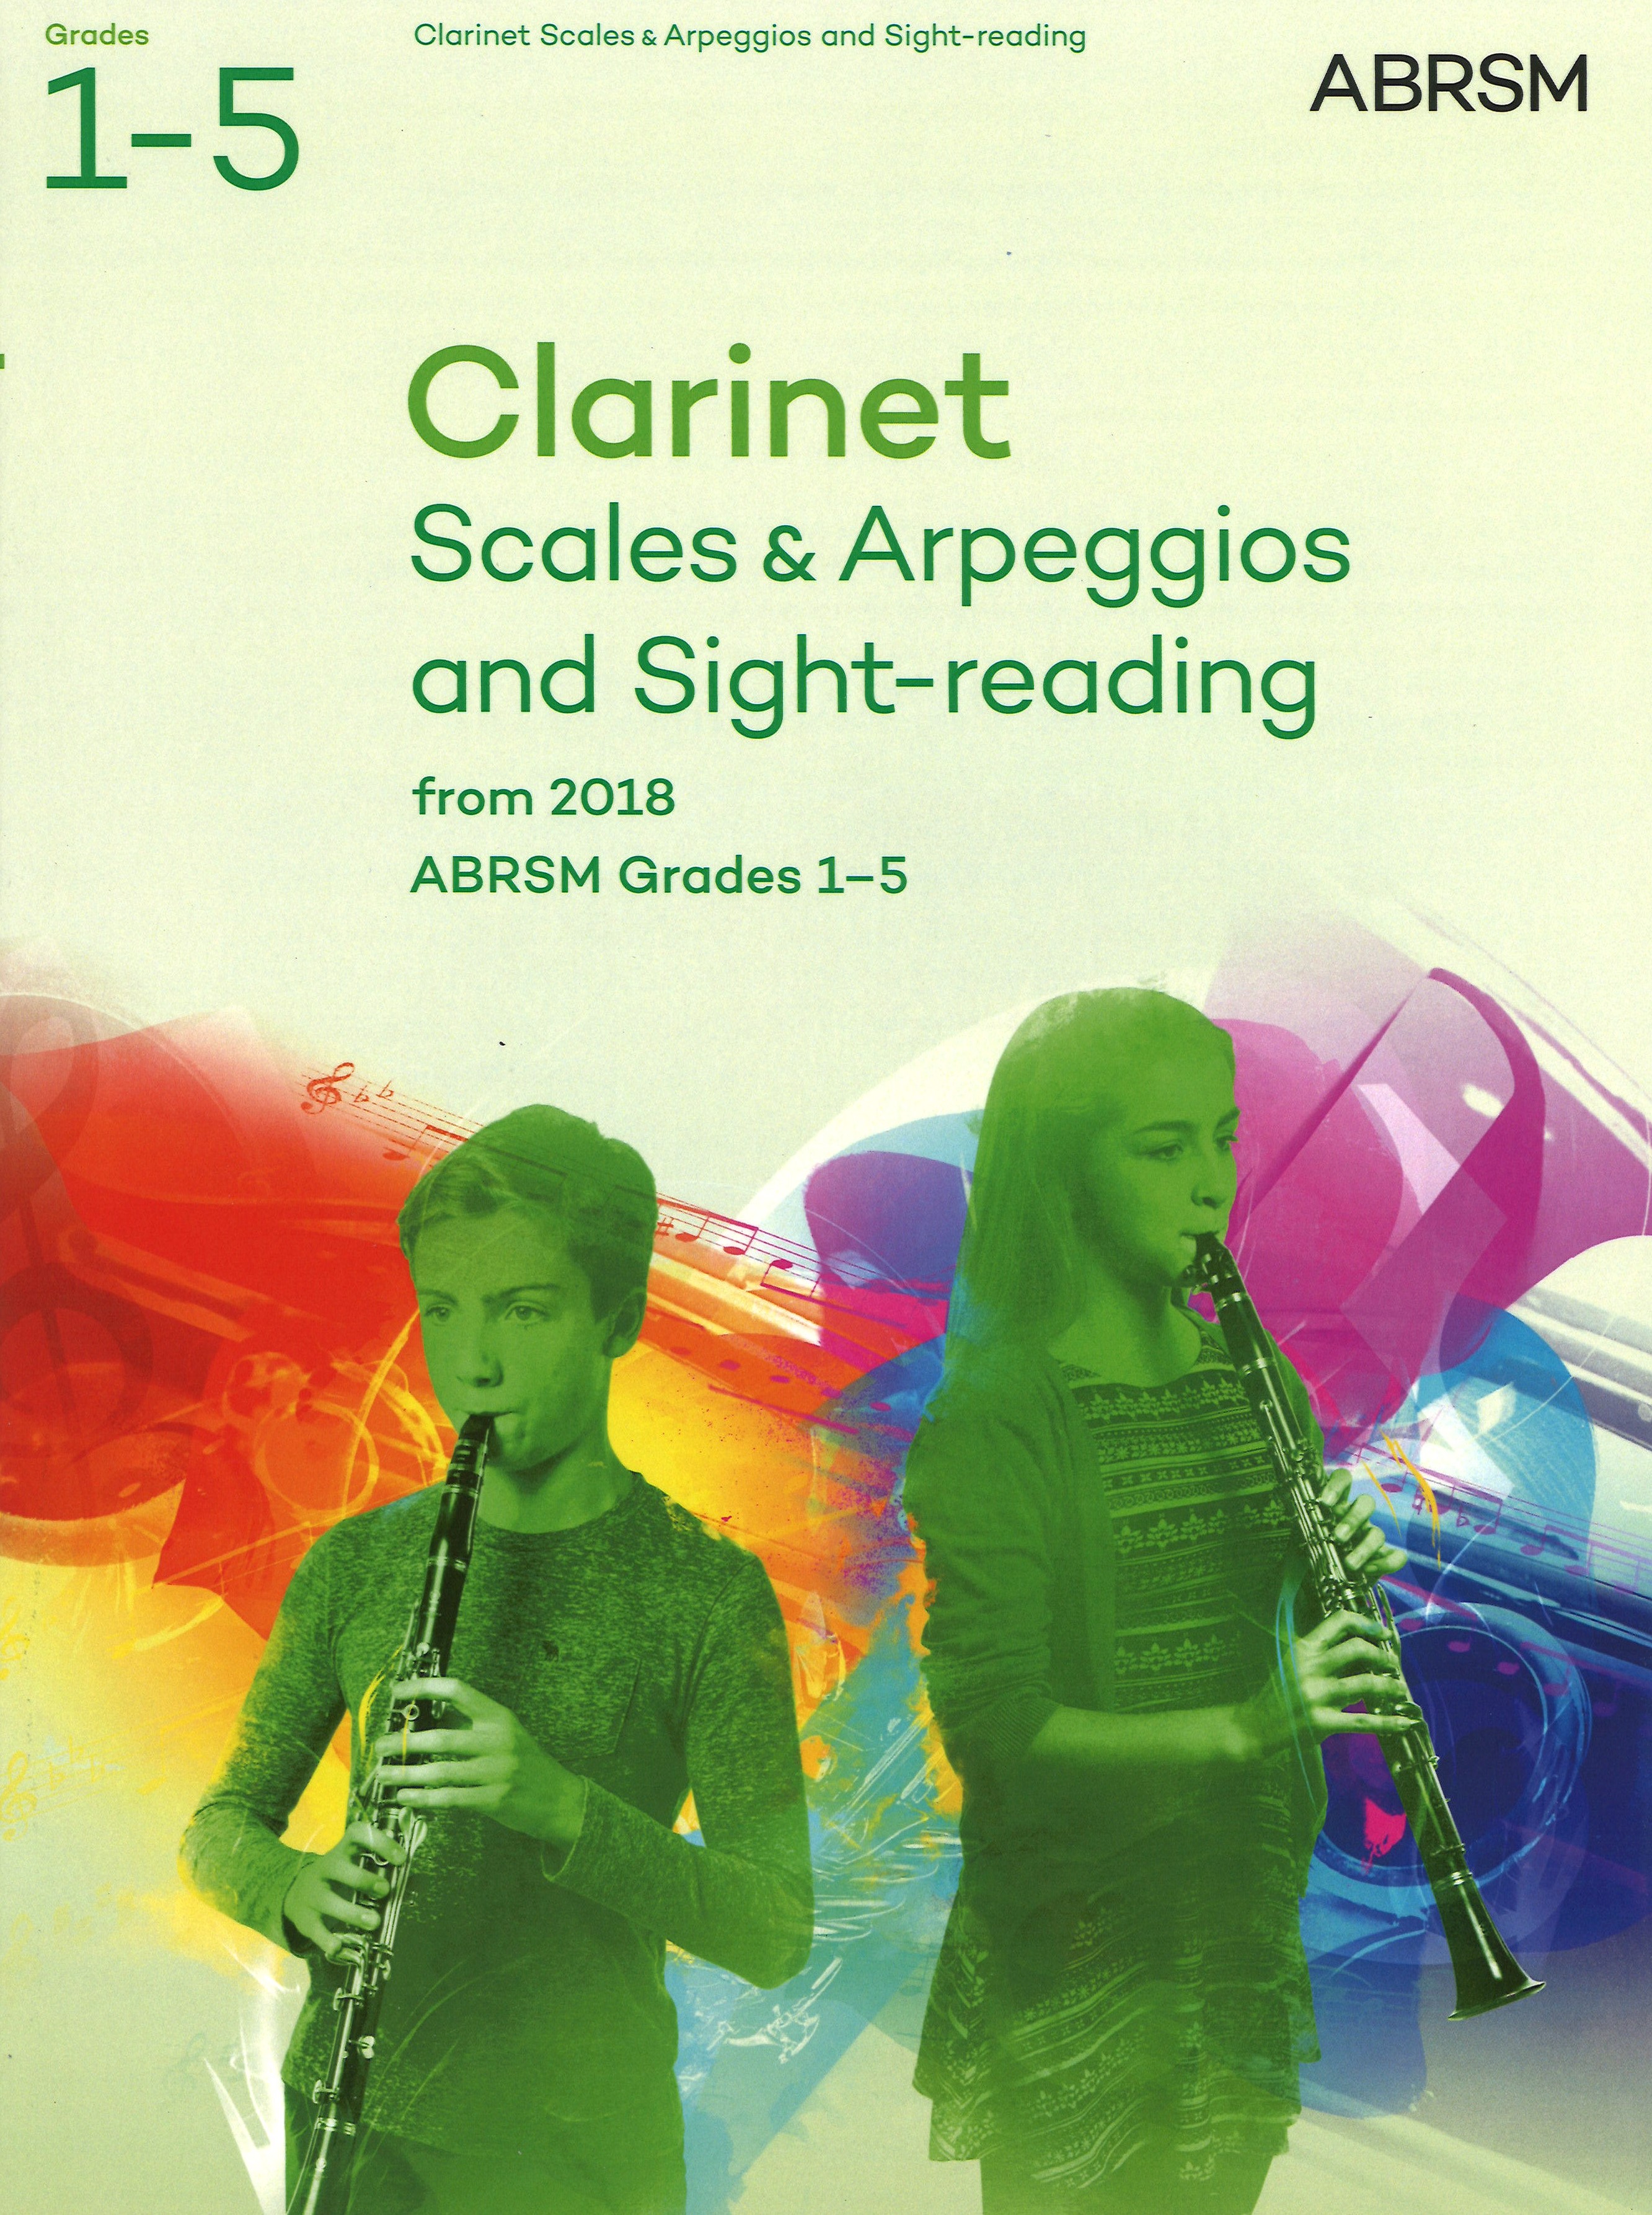 Clarinet Scales Arpeggios Sightreading 2018 Gr1-5 Sheet Music Songbook